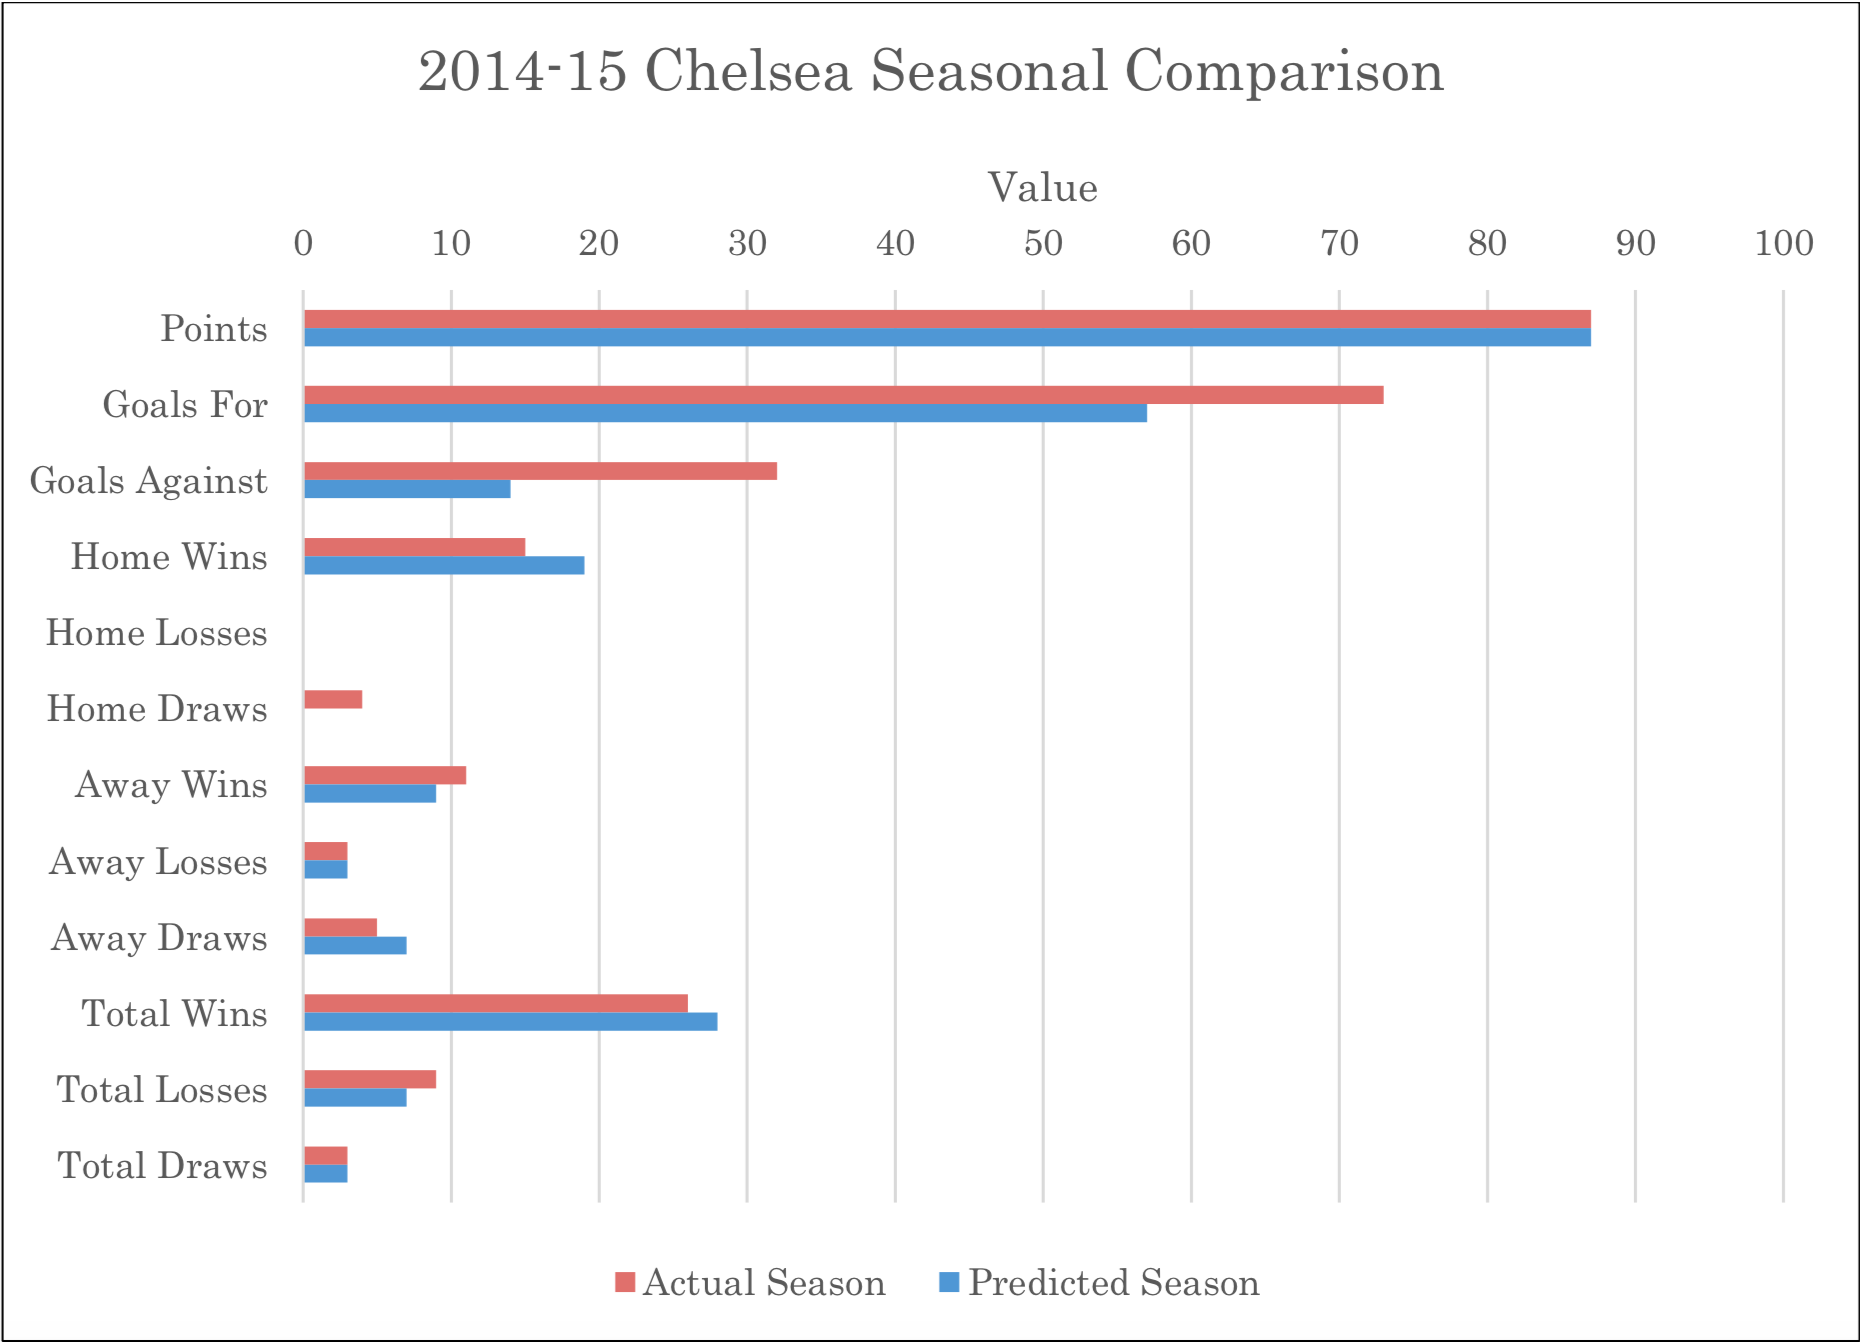 Chelsea Actual and Predicted Results Comparison